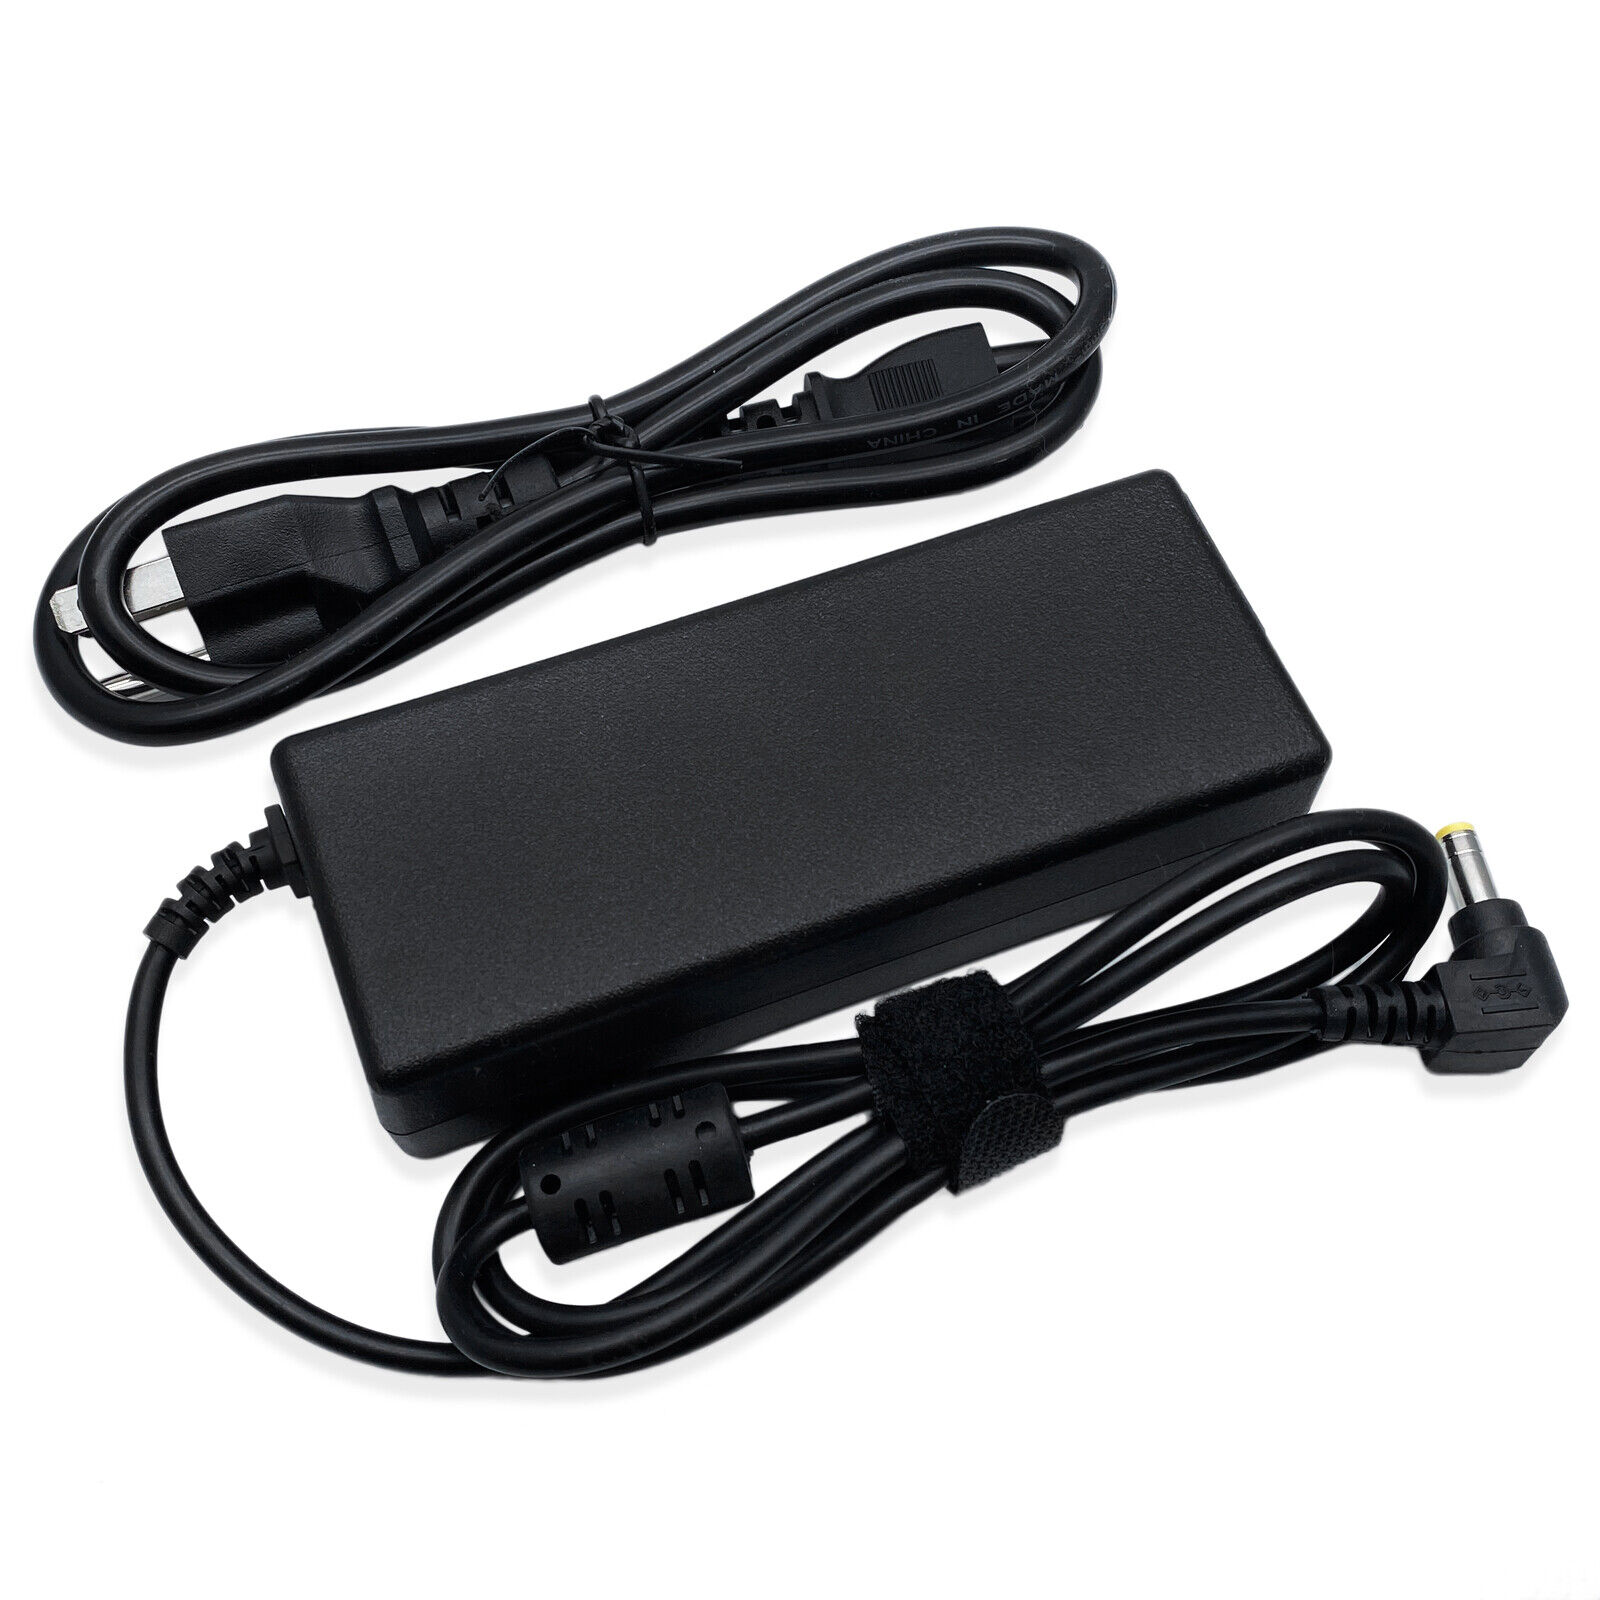 AC Adapter Cord Charger For Toshiba Satellite P775-S7100 P775-S7165 P850-BT3N22